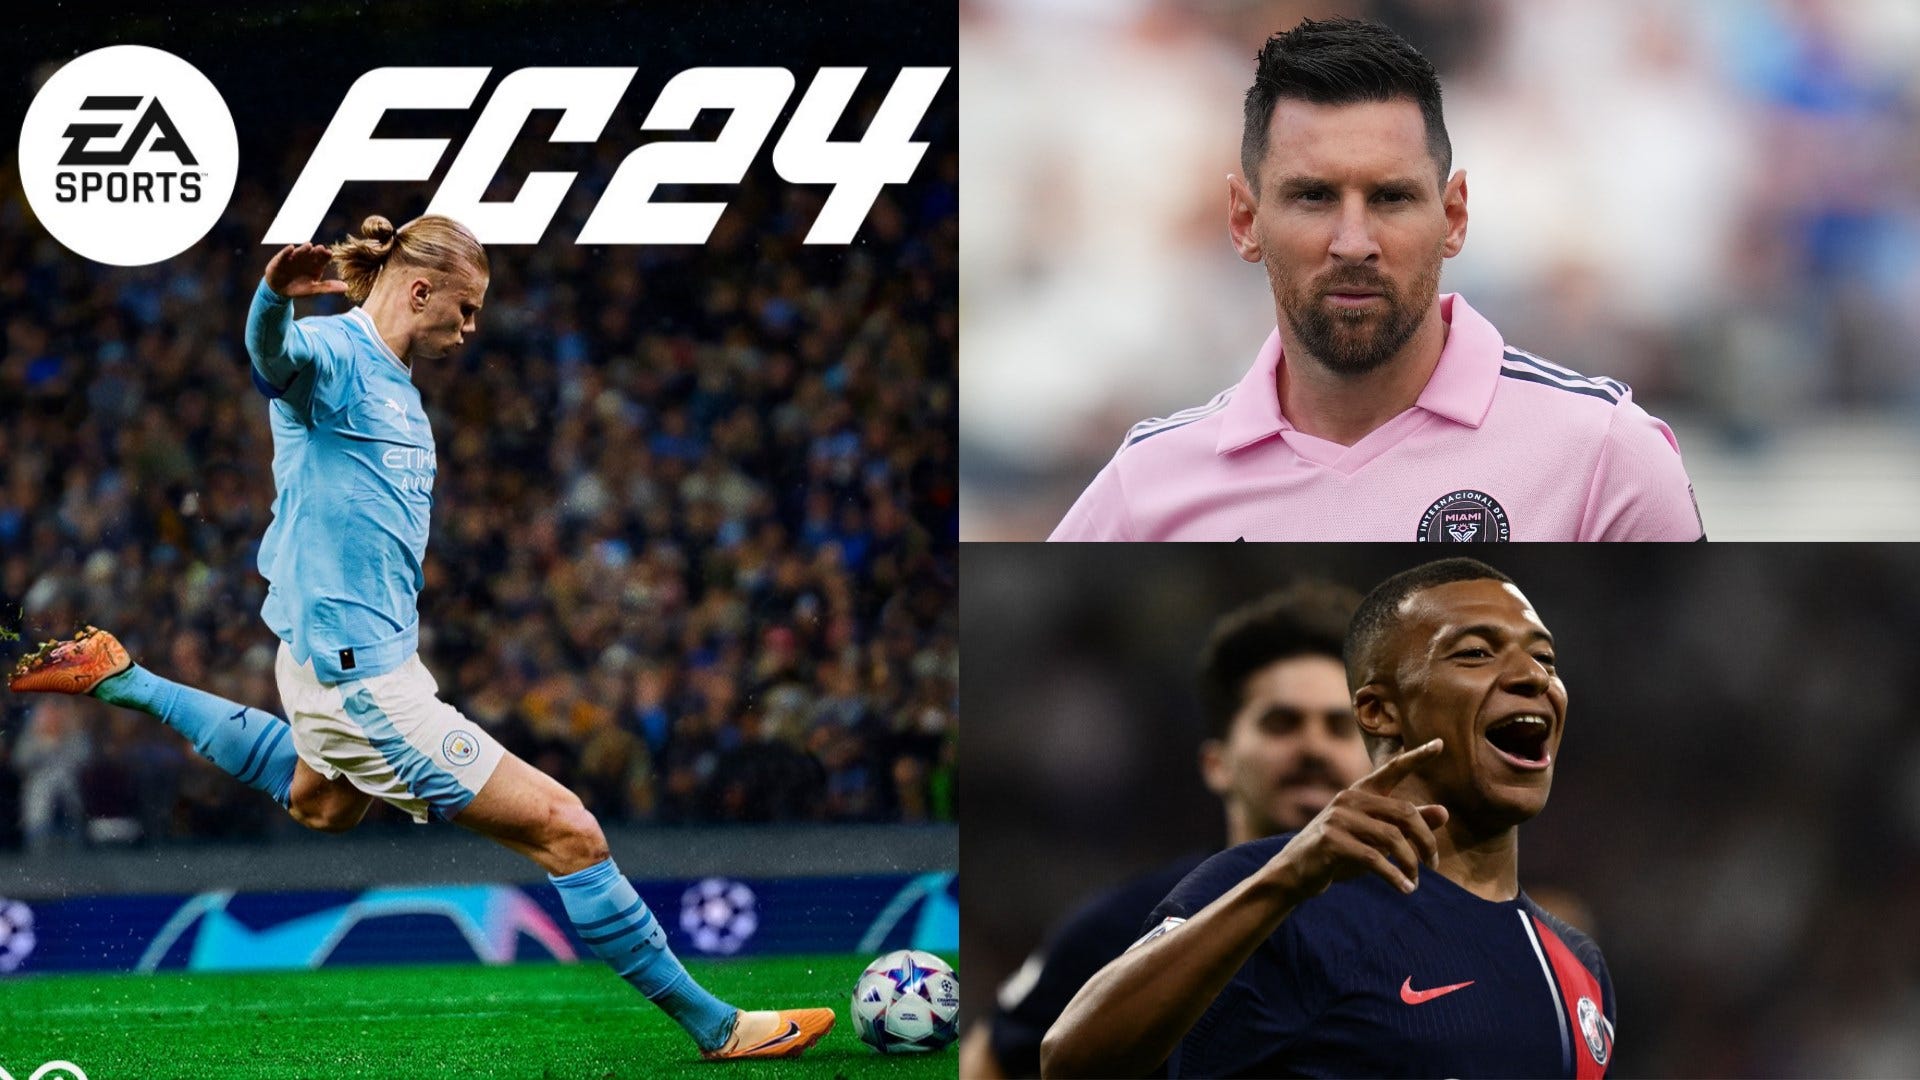 FIFA 23 cover star revealed: PSG star Mbappe the face of EA Sports' new game  for third successive year